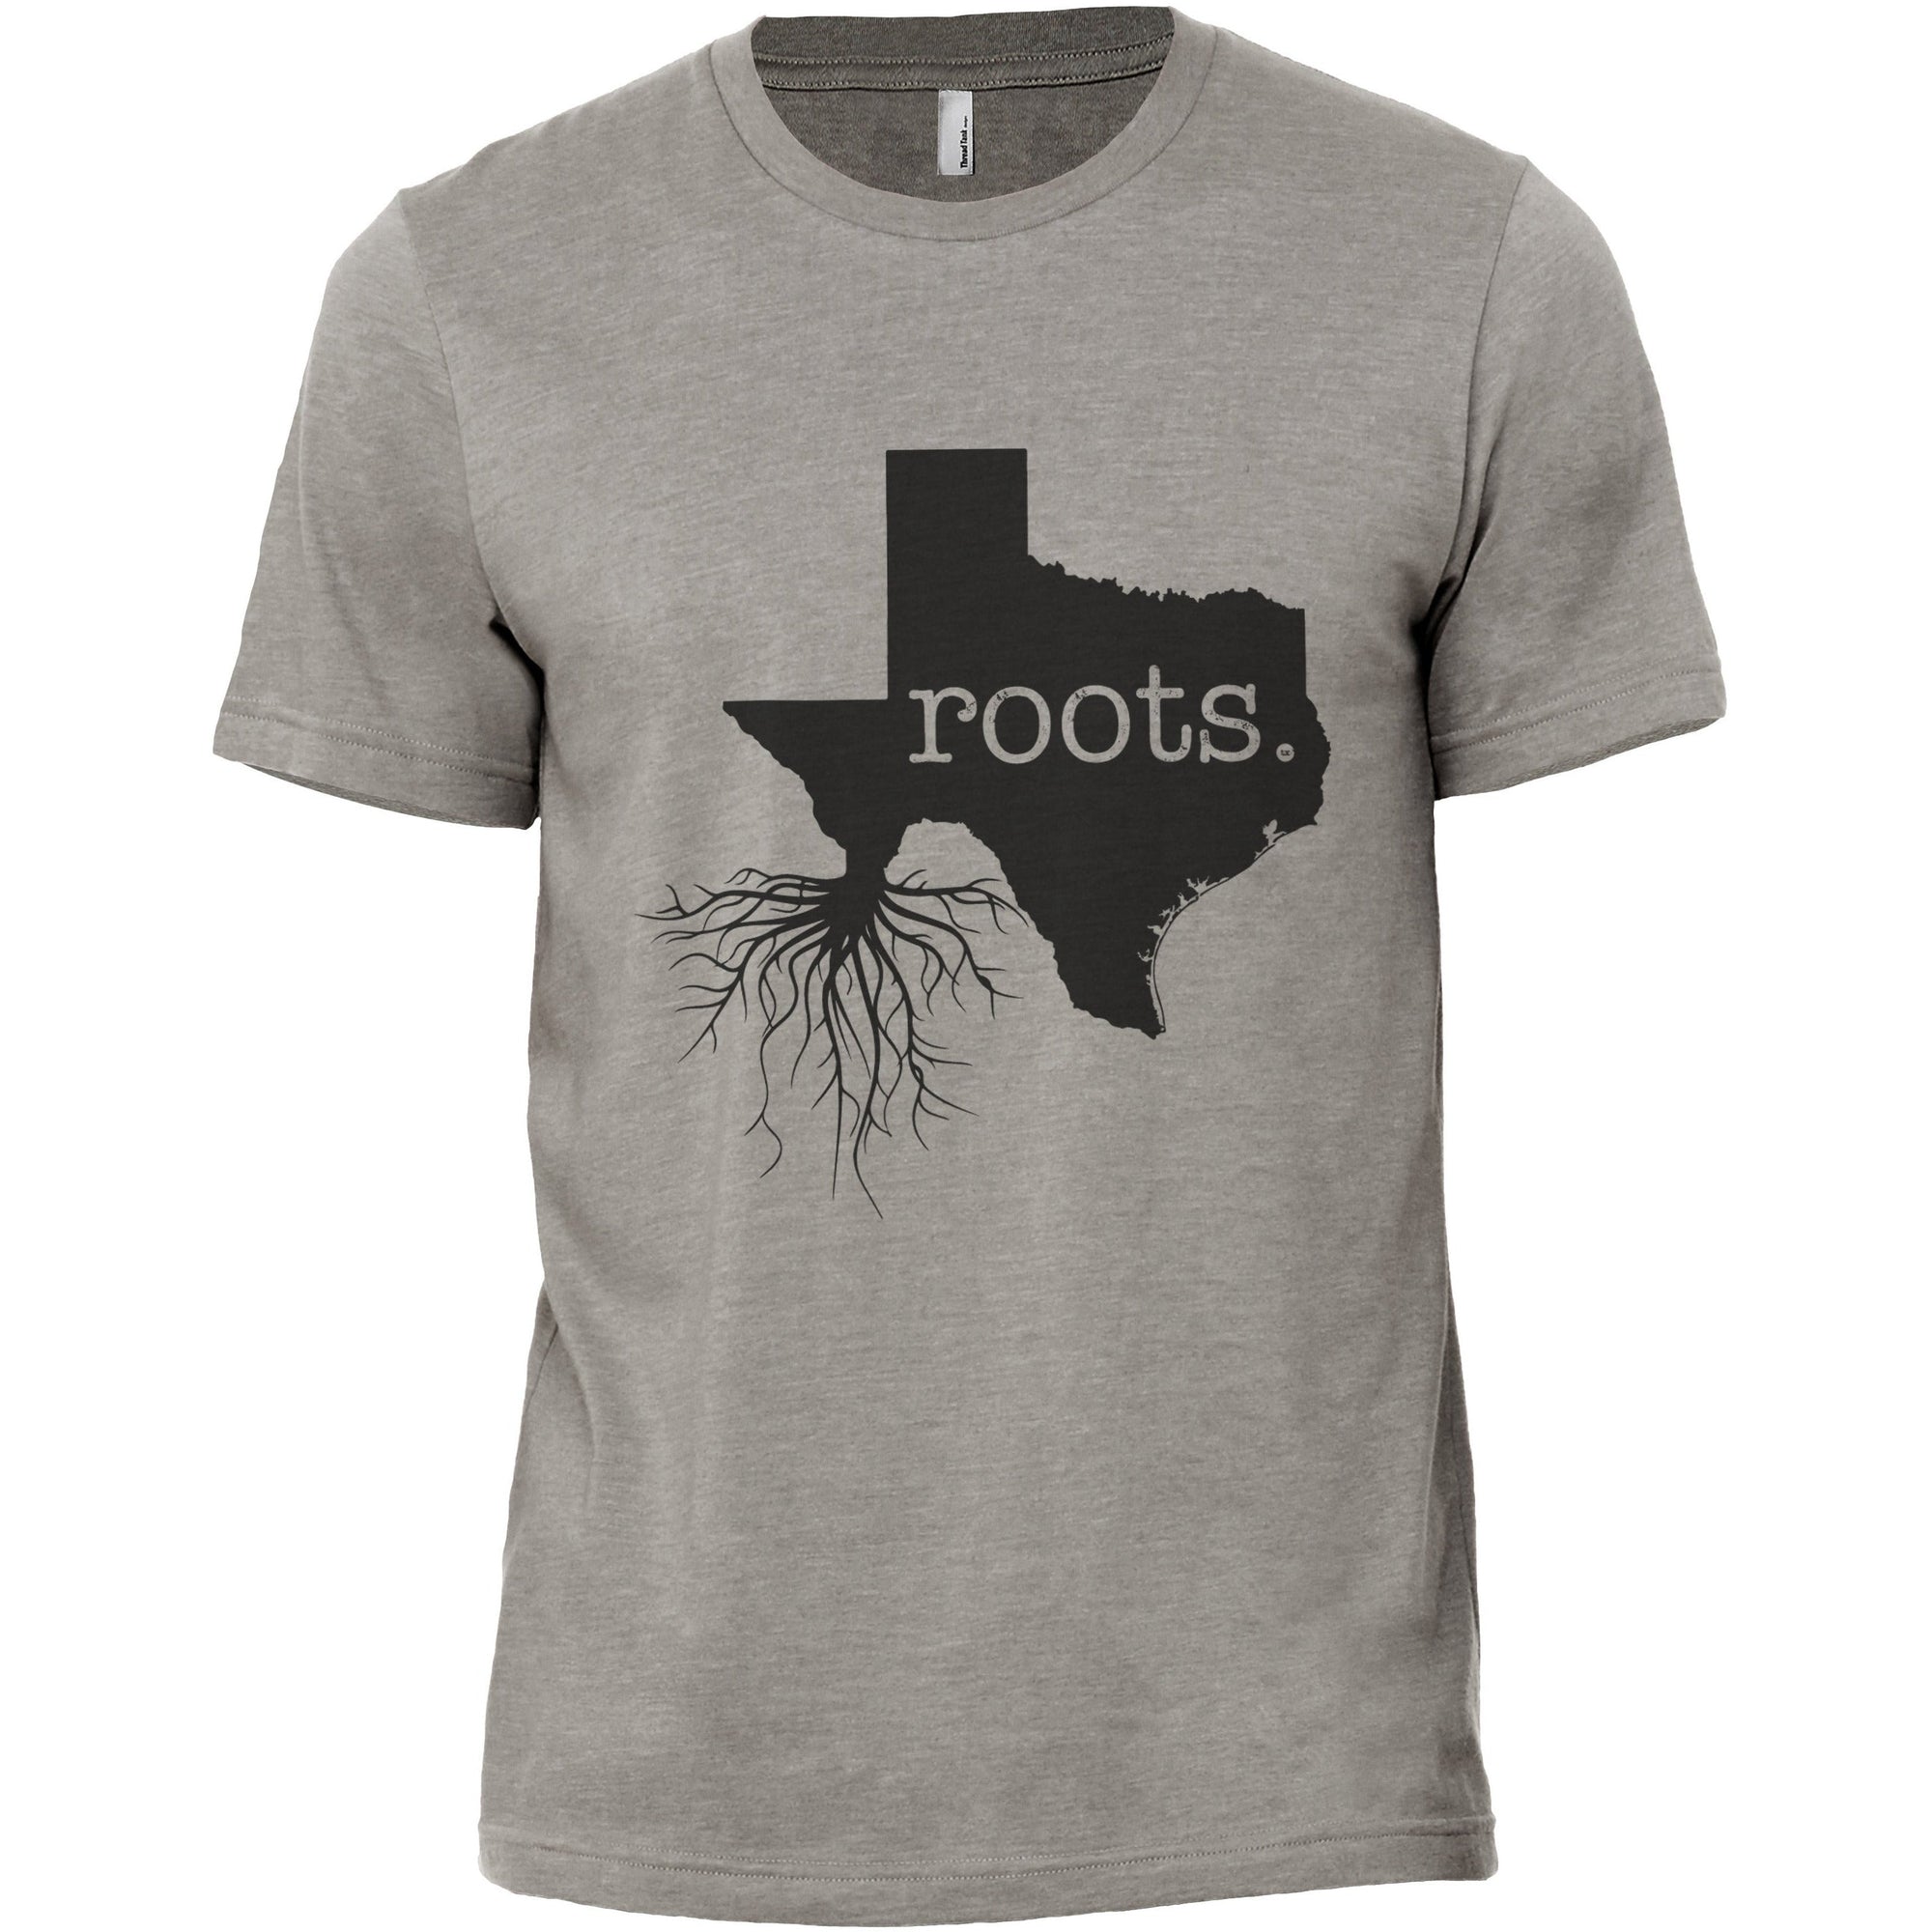 Roots Texas TX - Stories You Can Wear